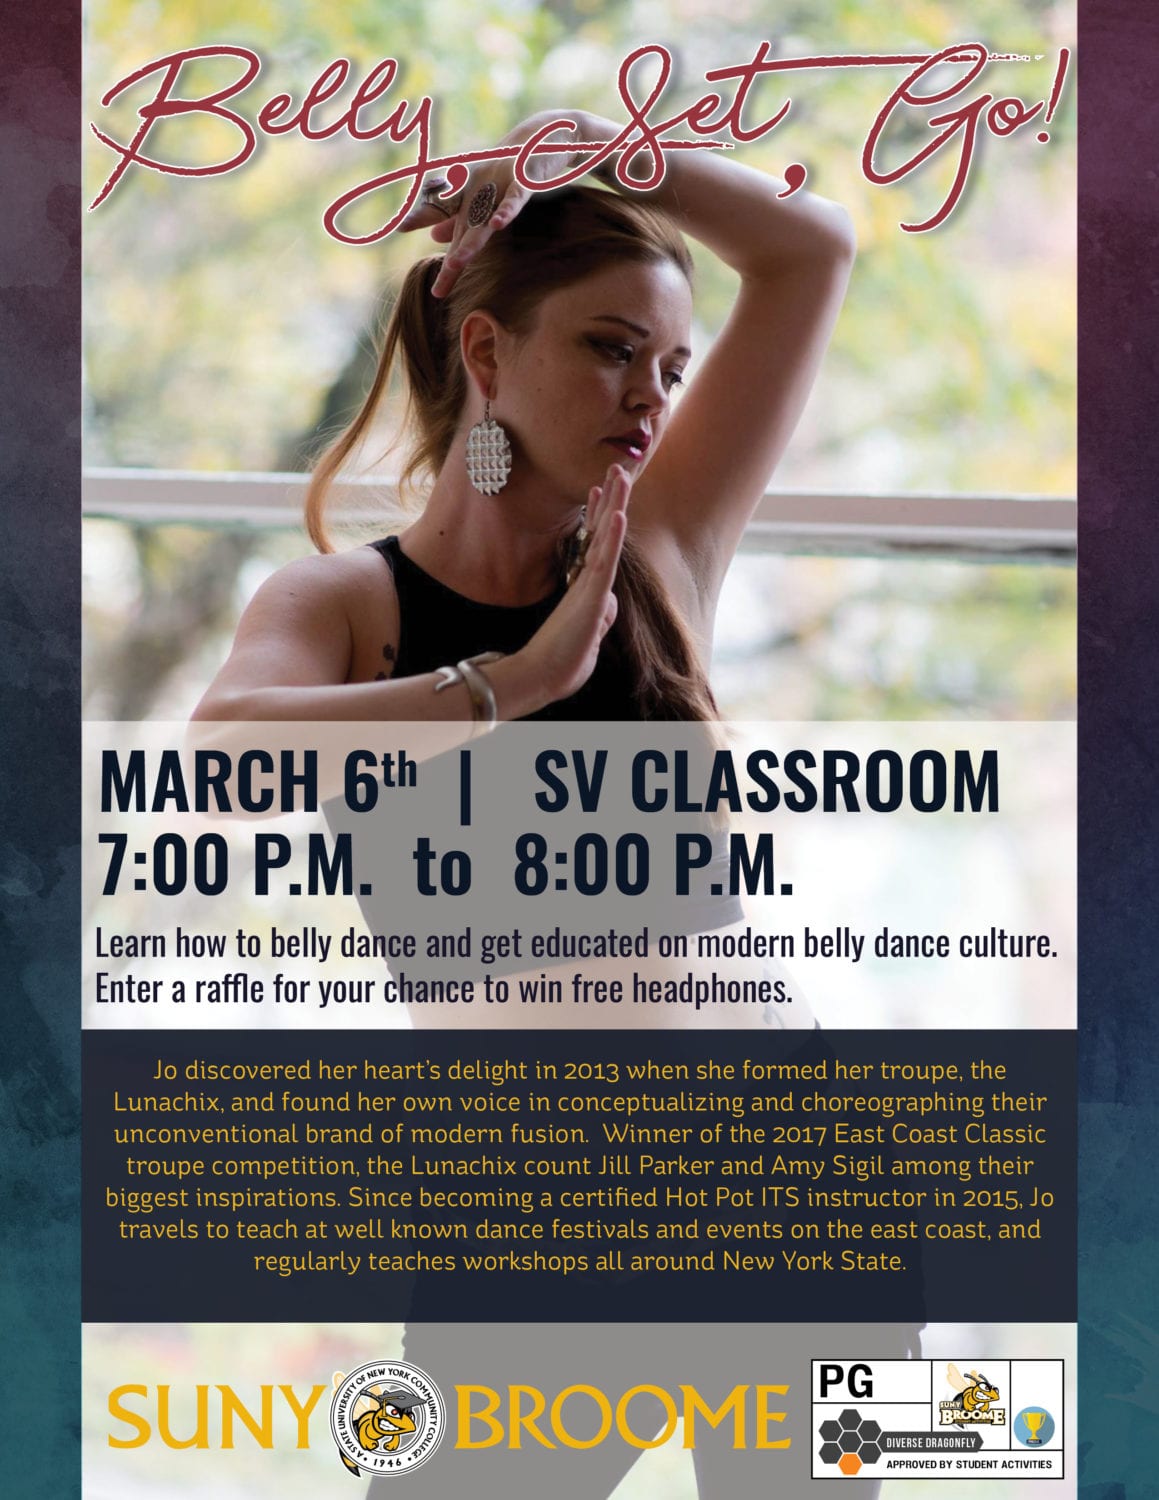 Learn how to bellydance on March 6